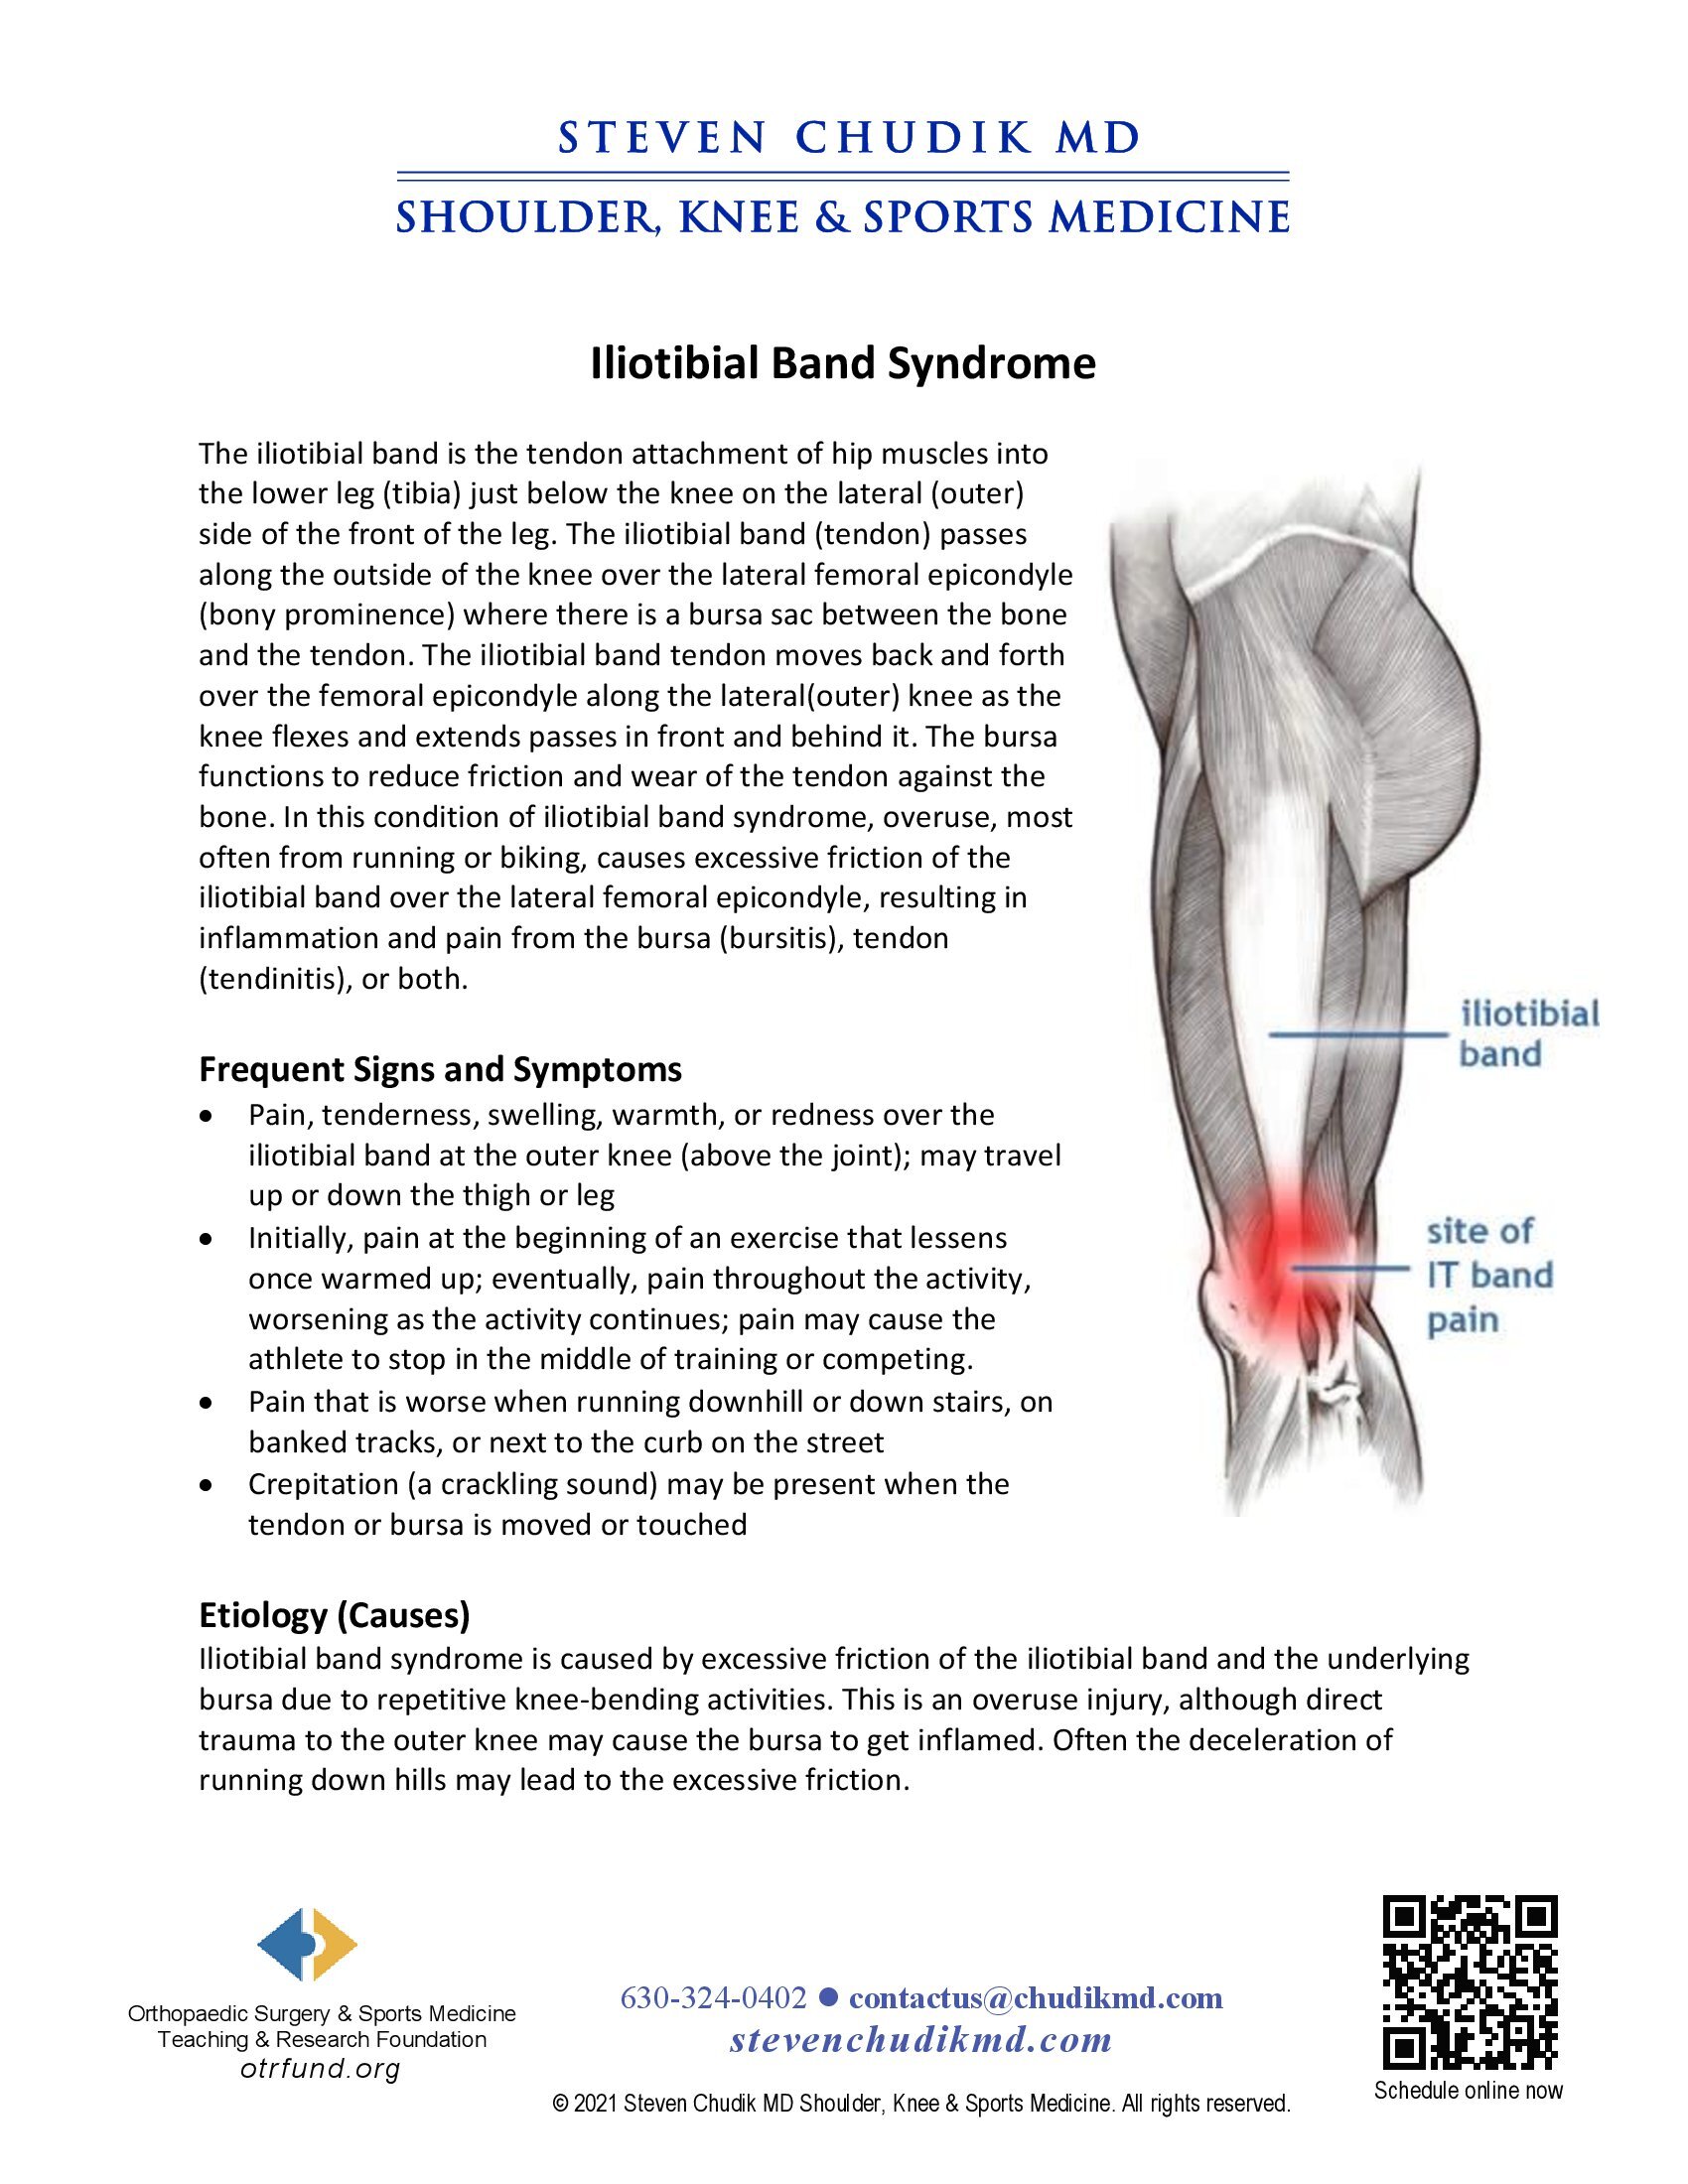 ILIOTIBIAL BAND SYNDROME: THE PATHOPHYSIOLOGY, CLINICAL ASSESSMENT